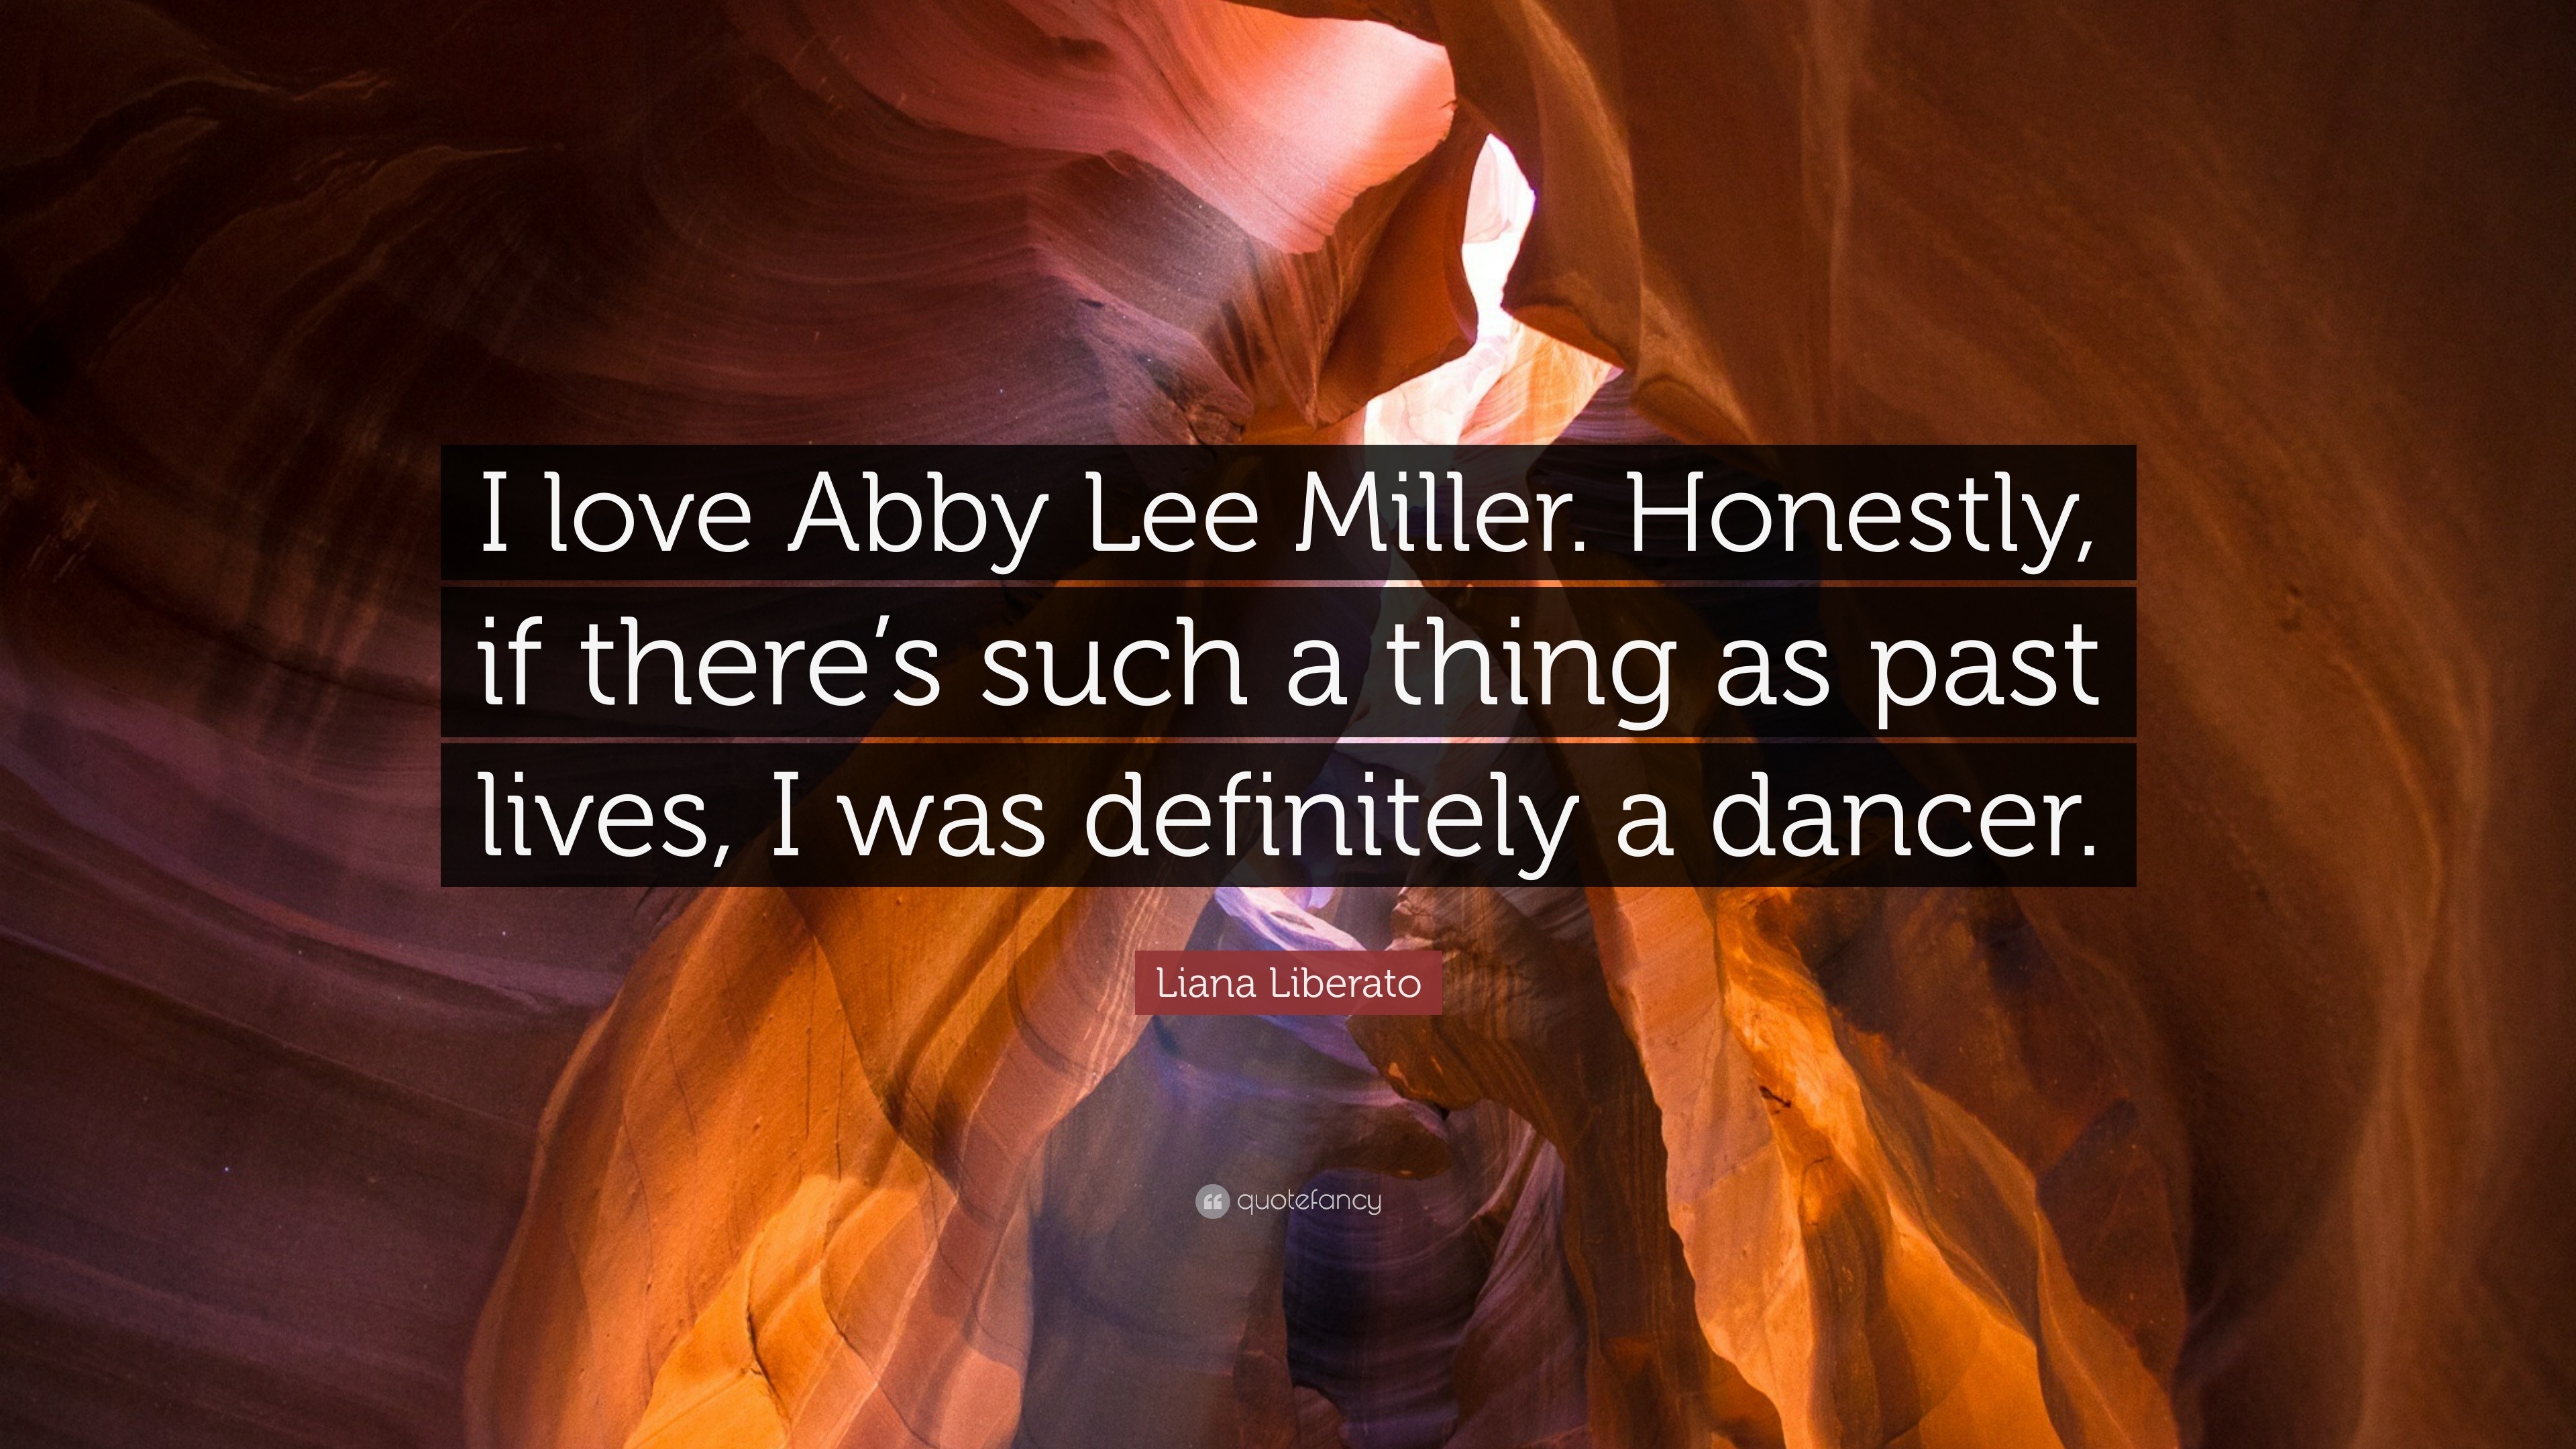 Liana Liberato Quote: “I love Abby Lee Miller. Honestly, if there's such a  thing as past